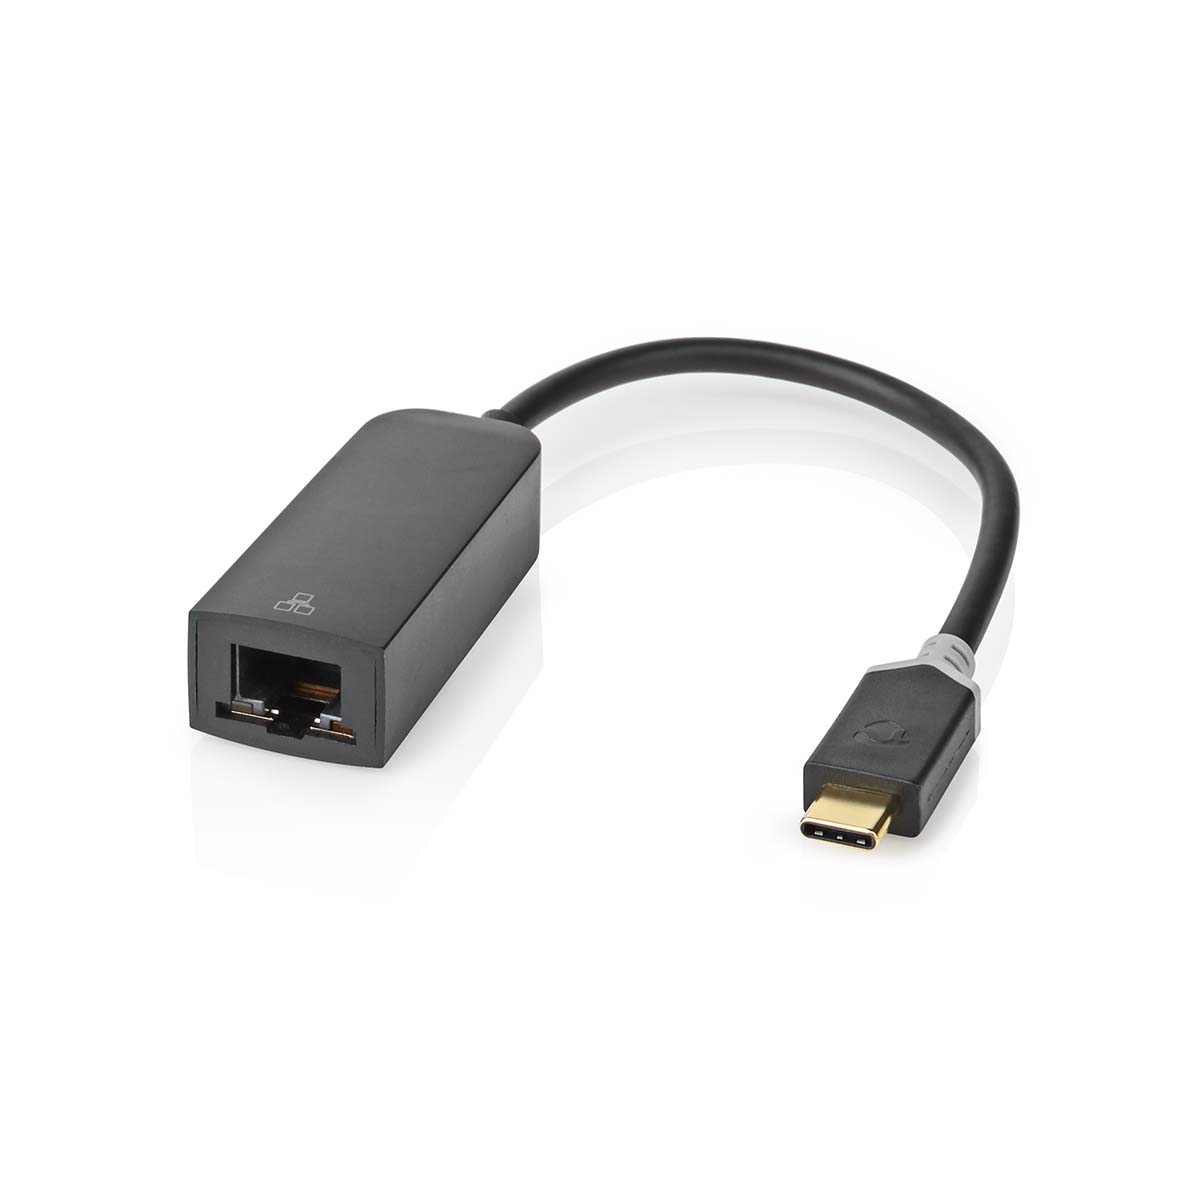 2 wire usb adapter